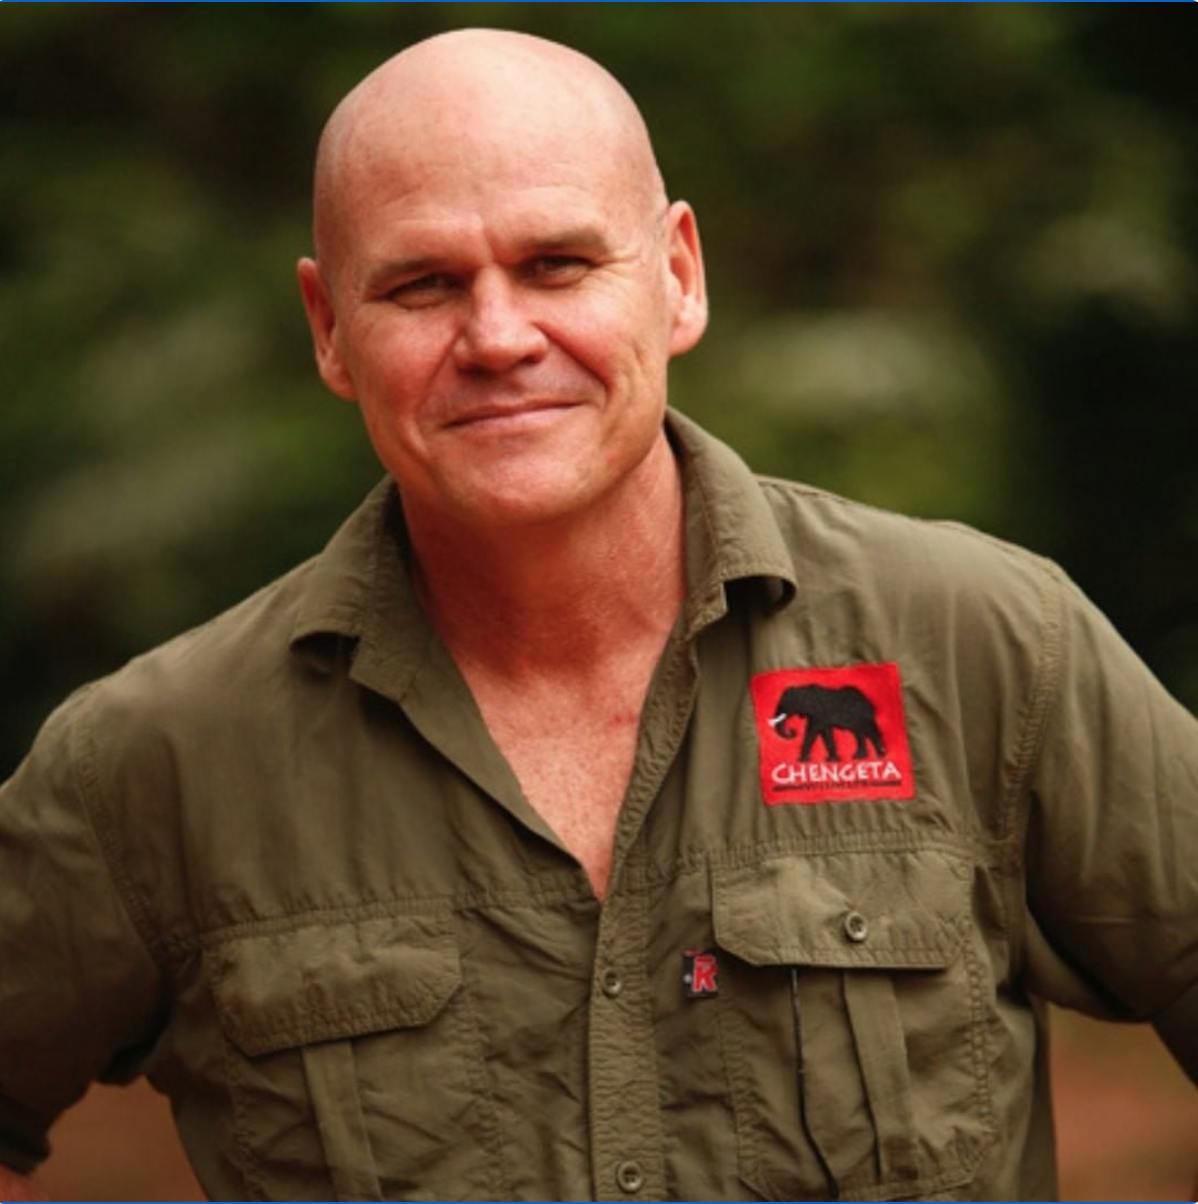 Chengeta Wildlife's co-founder and CEO, Rory Young, tragically killed in Burkina Faso